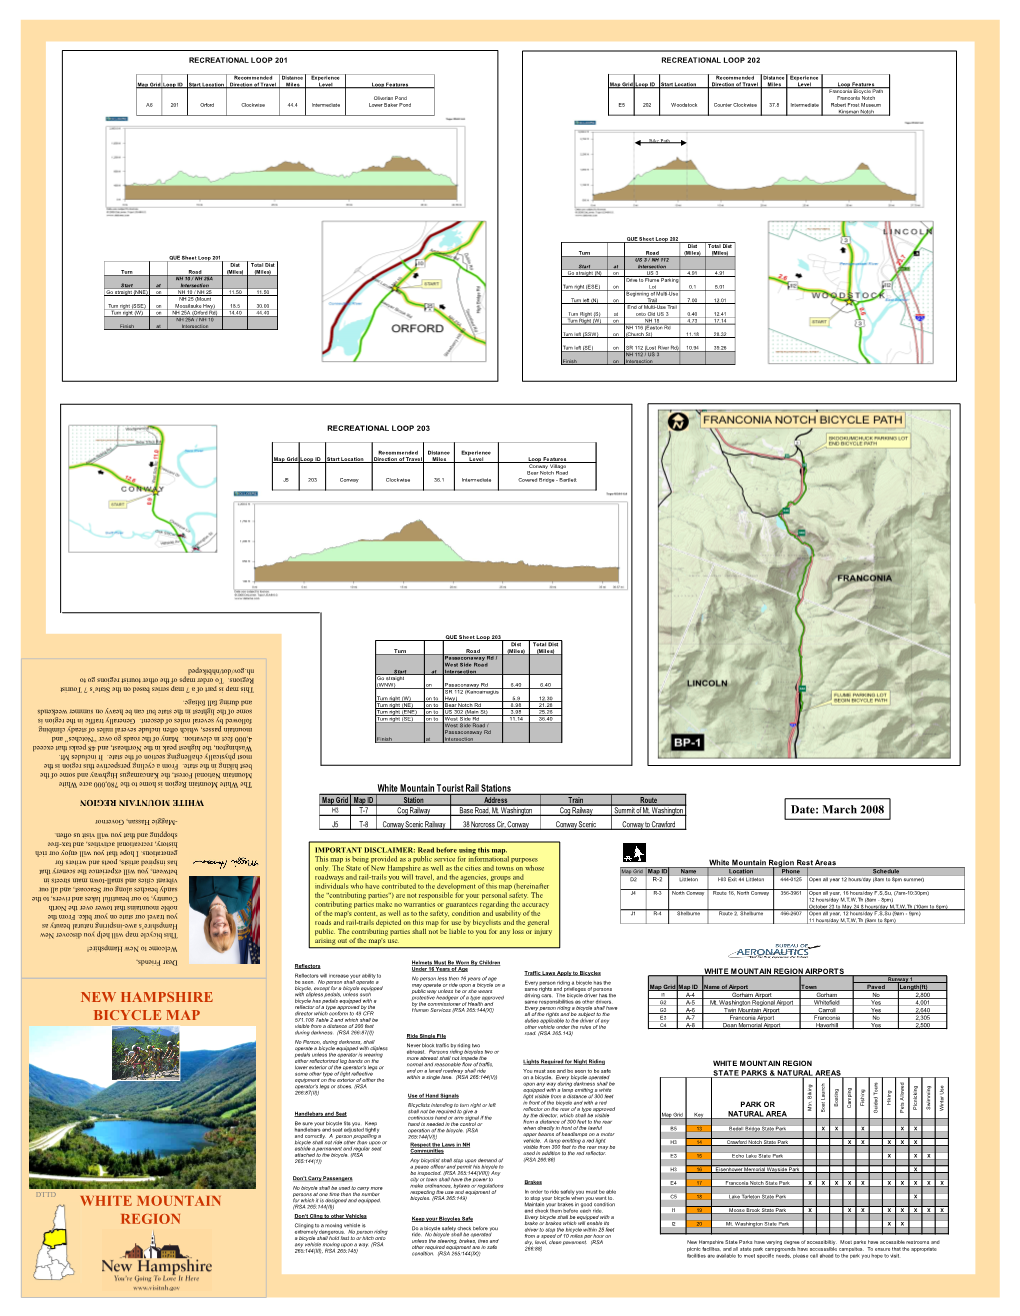 New Hampshire Bicycle Map White Mountain Region